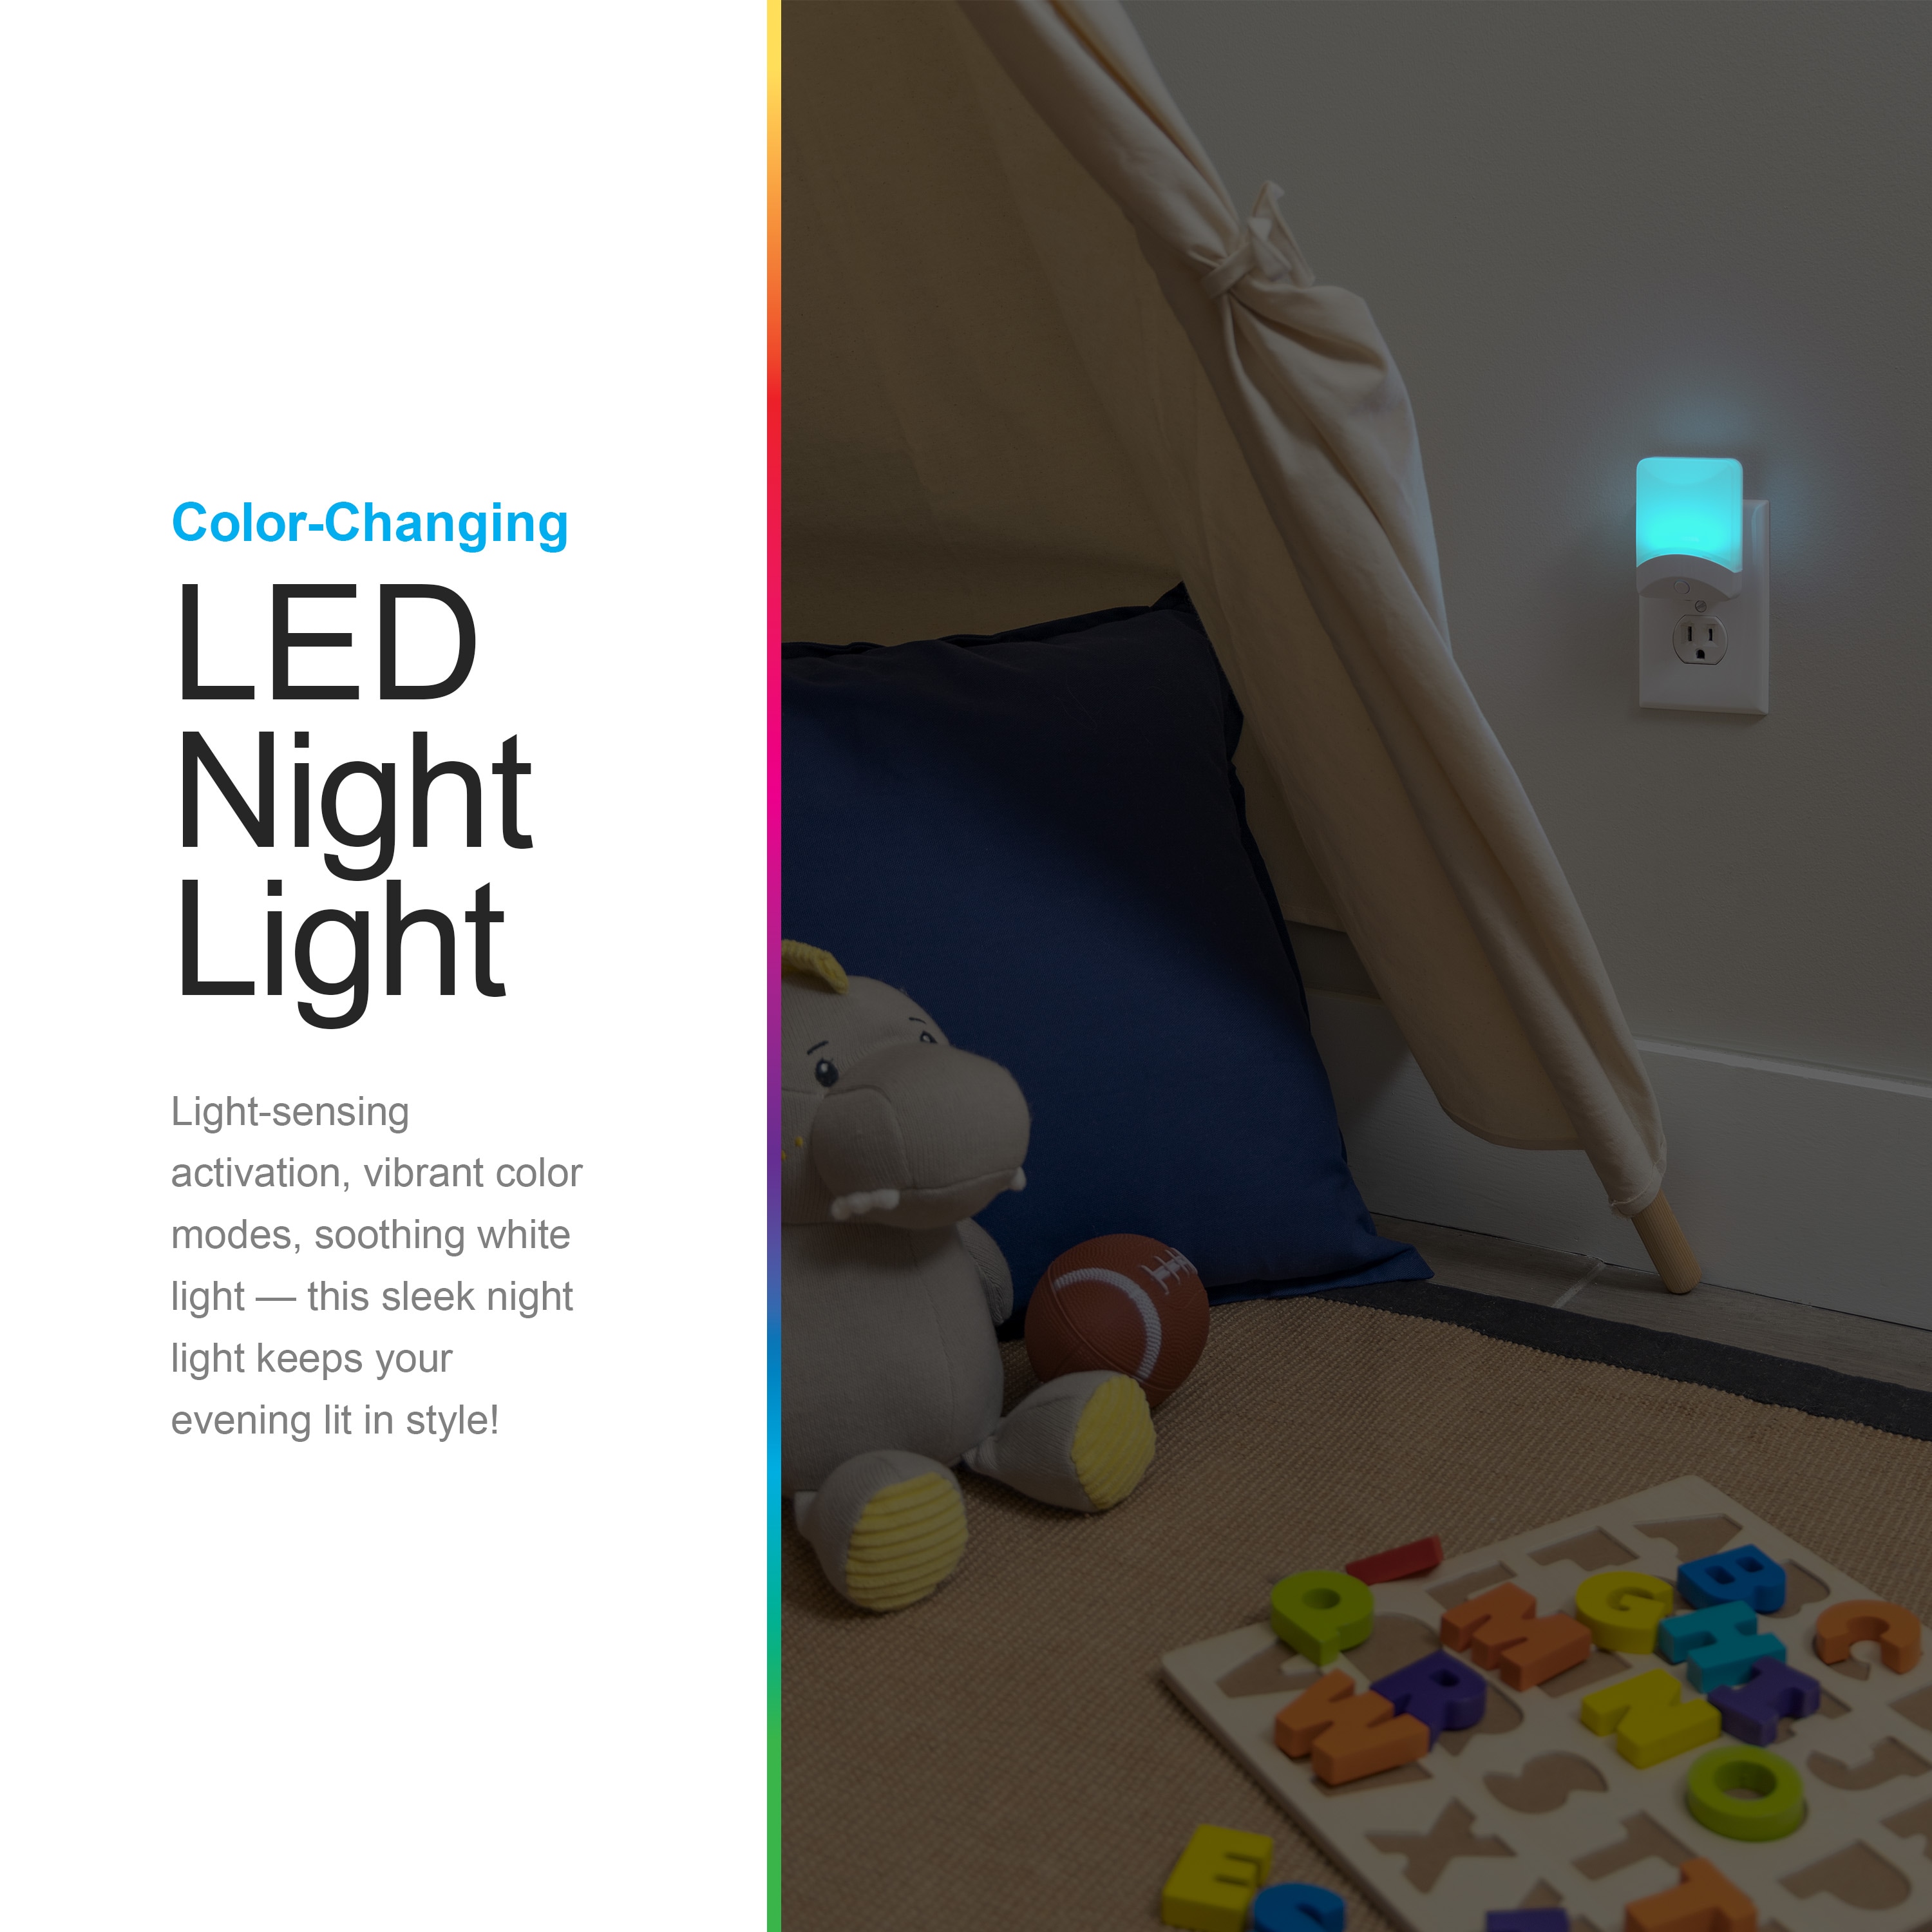 LED Light Bulb, Color Changing Night Lights - Compatible with